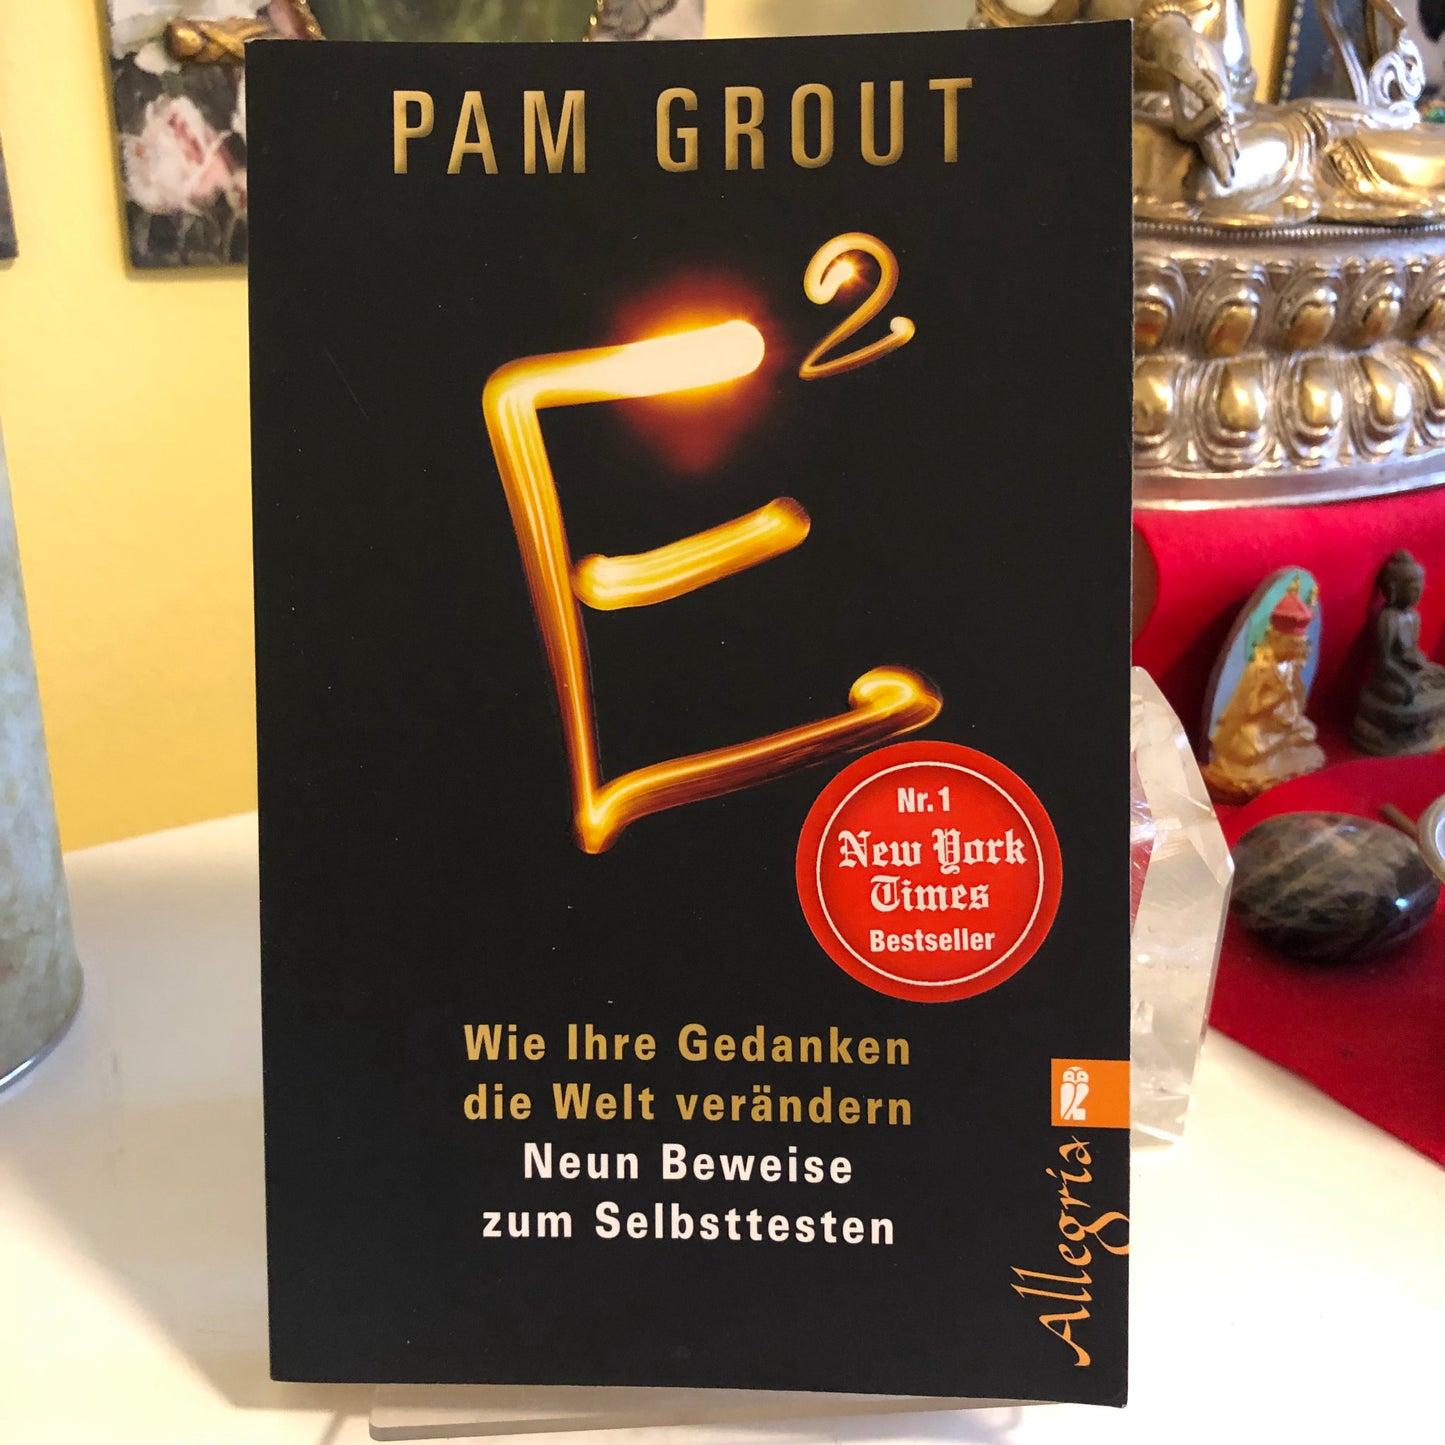 E² - Pam Grout